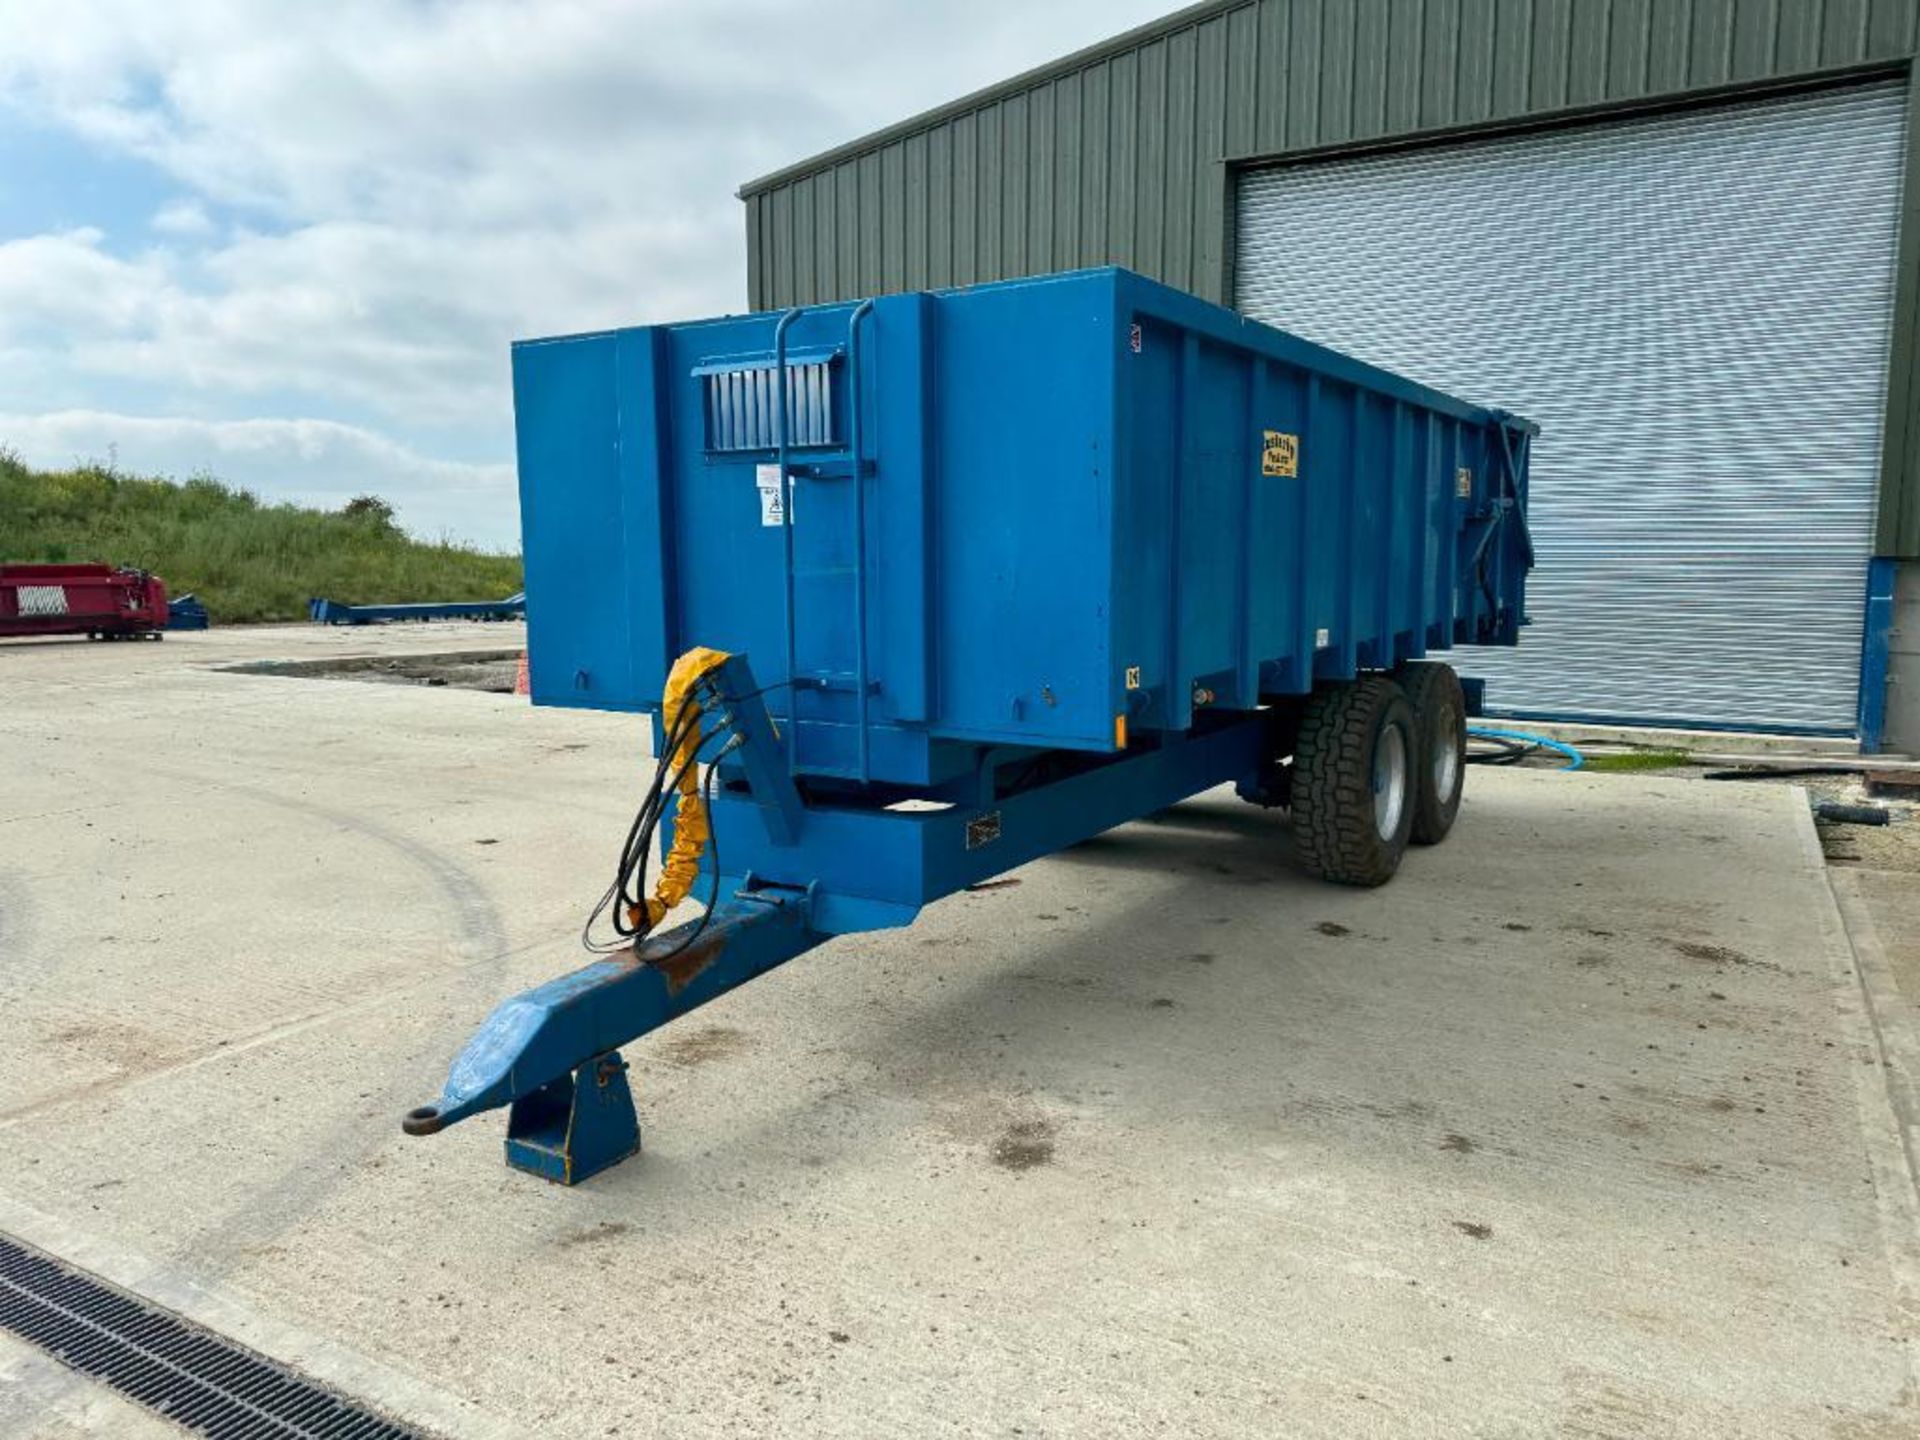 2010 Easterby ET14 15t twin axle grain trailer with sprung drawbar, hydraulic tailgate and grain chu